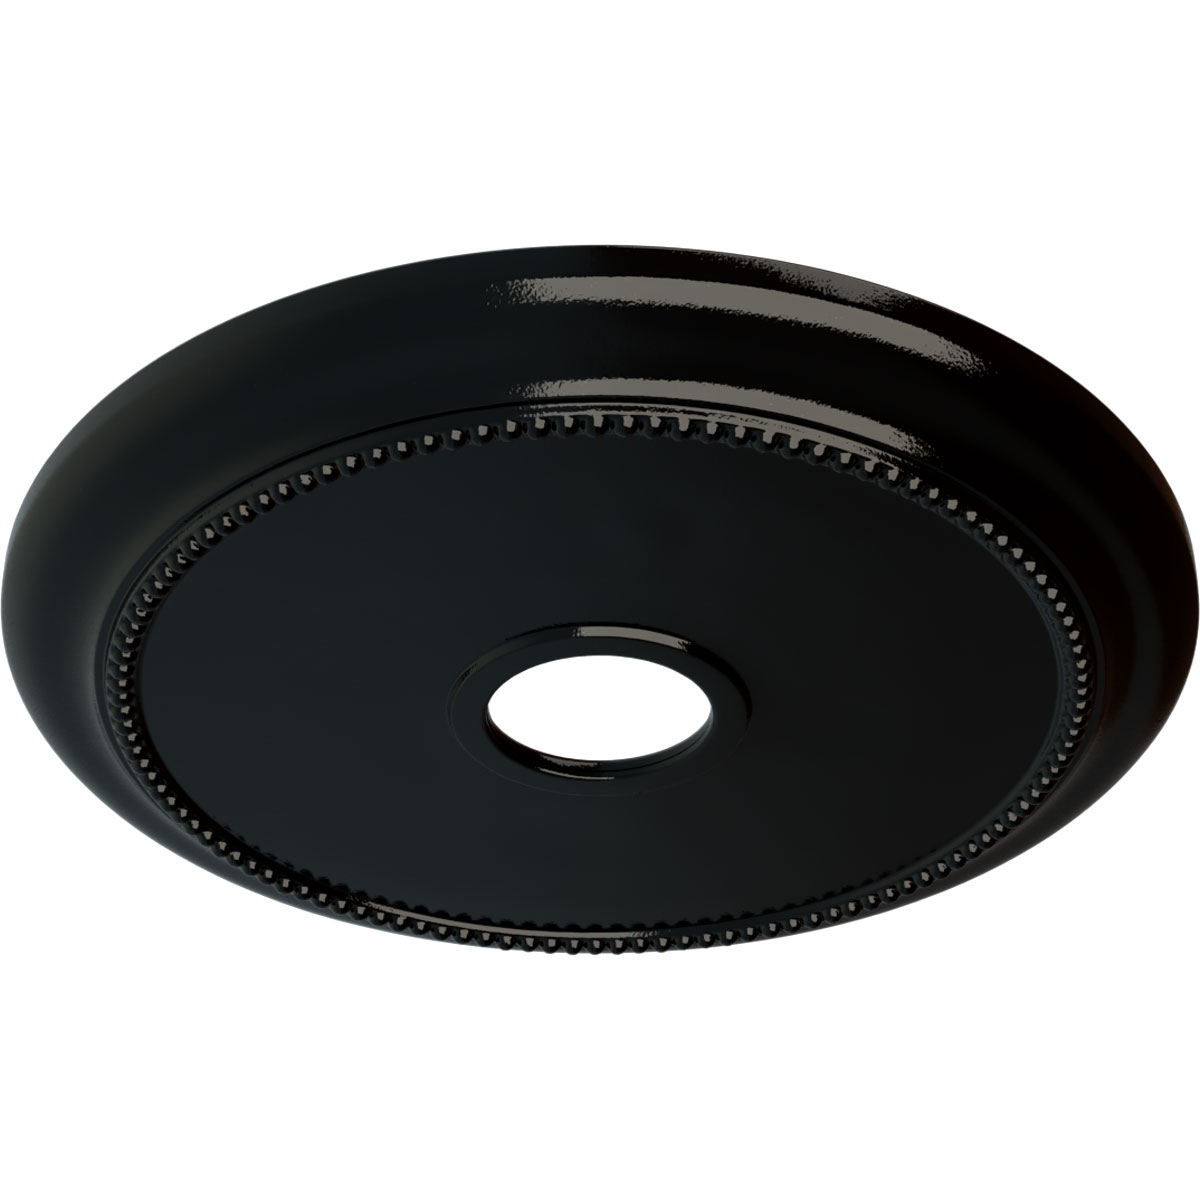 Ekena Millwork 24 1/8"OD x 4 3/8"ID x 2 1/4"P Crendon Ceiling Medallion (Fits Canopies up to 4 3/8"), Hand-Painted Black Pearl - image 2 of 4